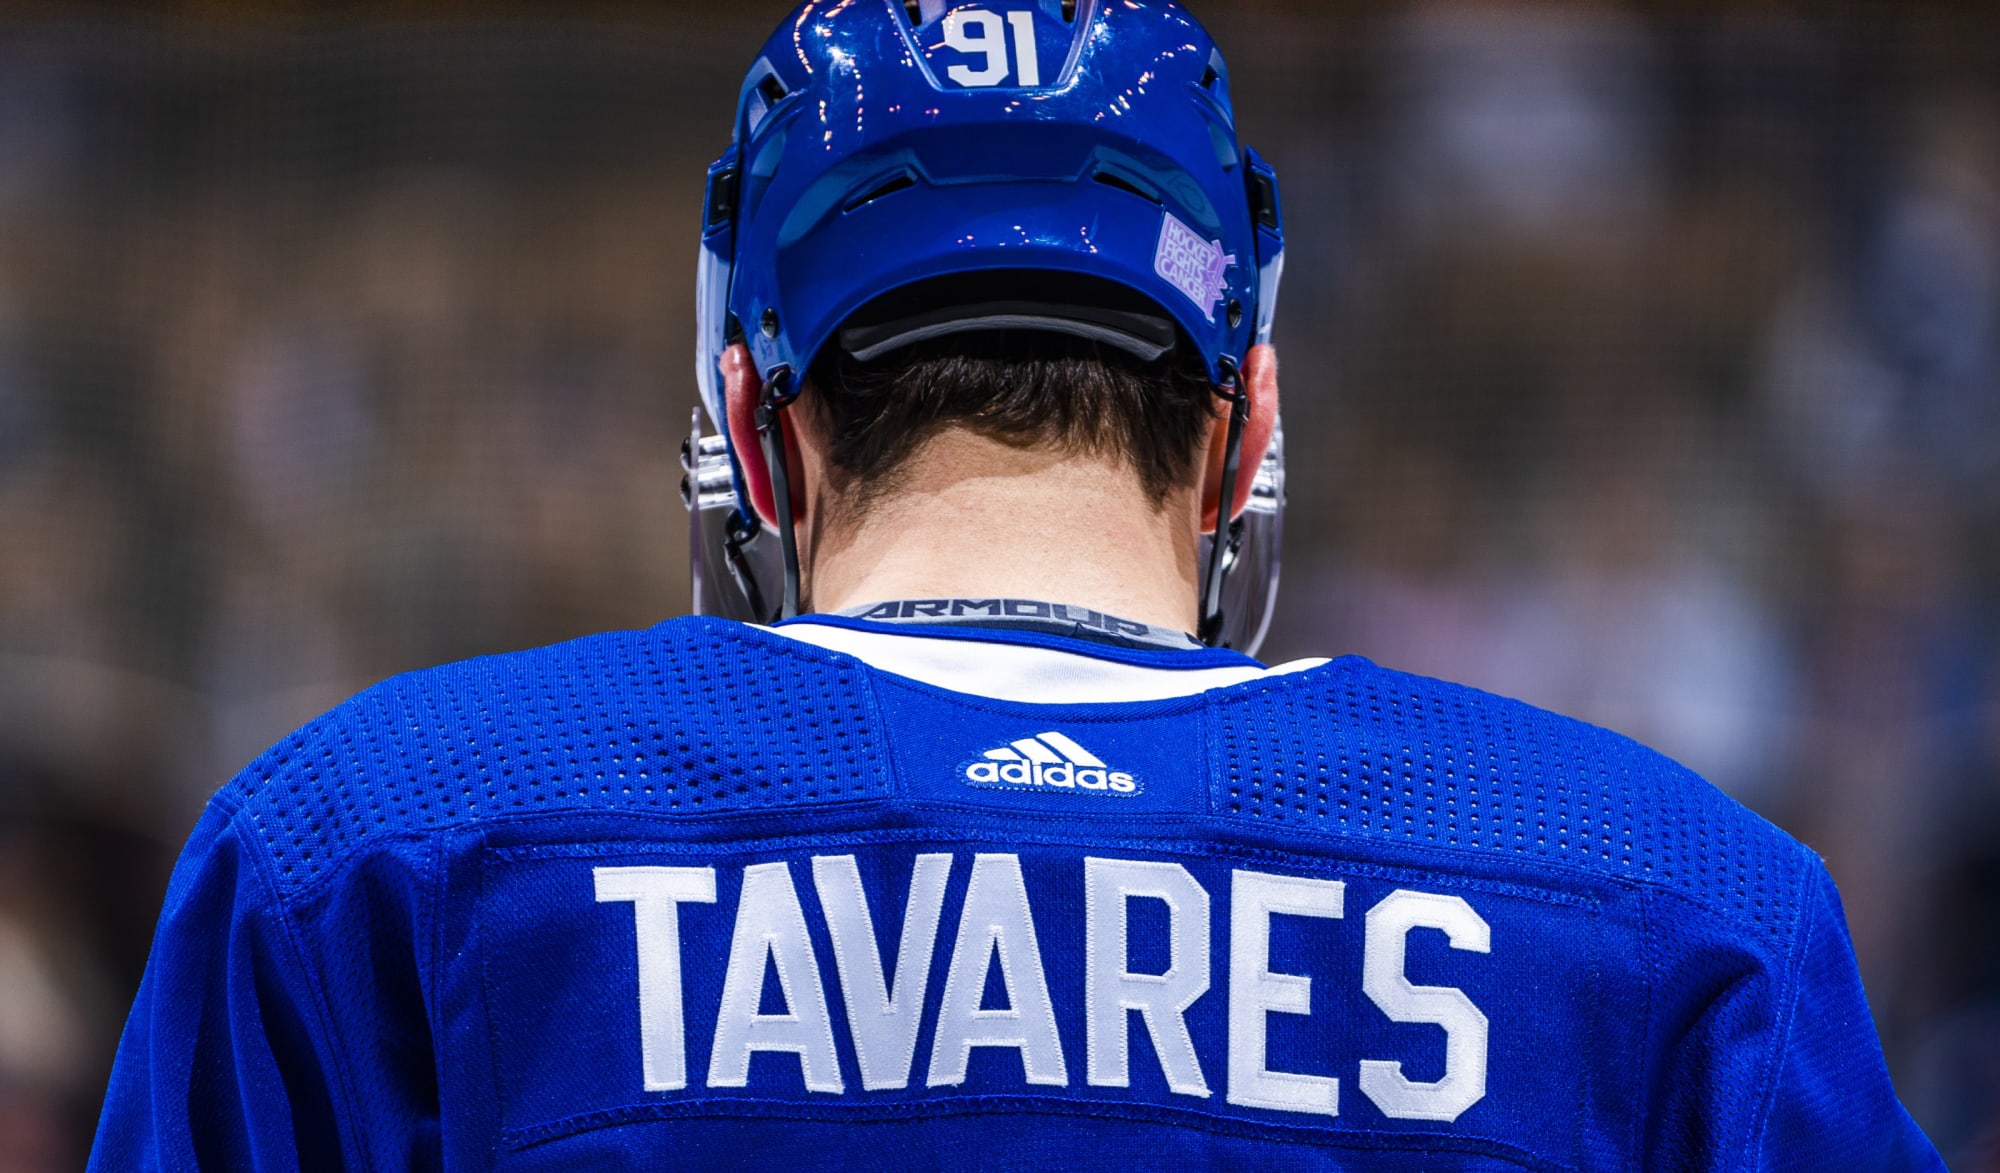 John Tavares shares throwback photo after signing with Maple Leafs